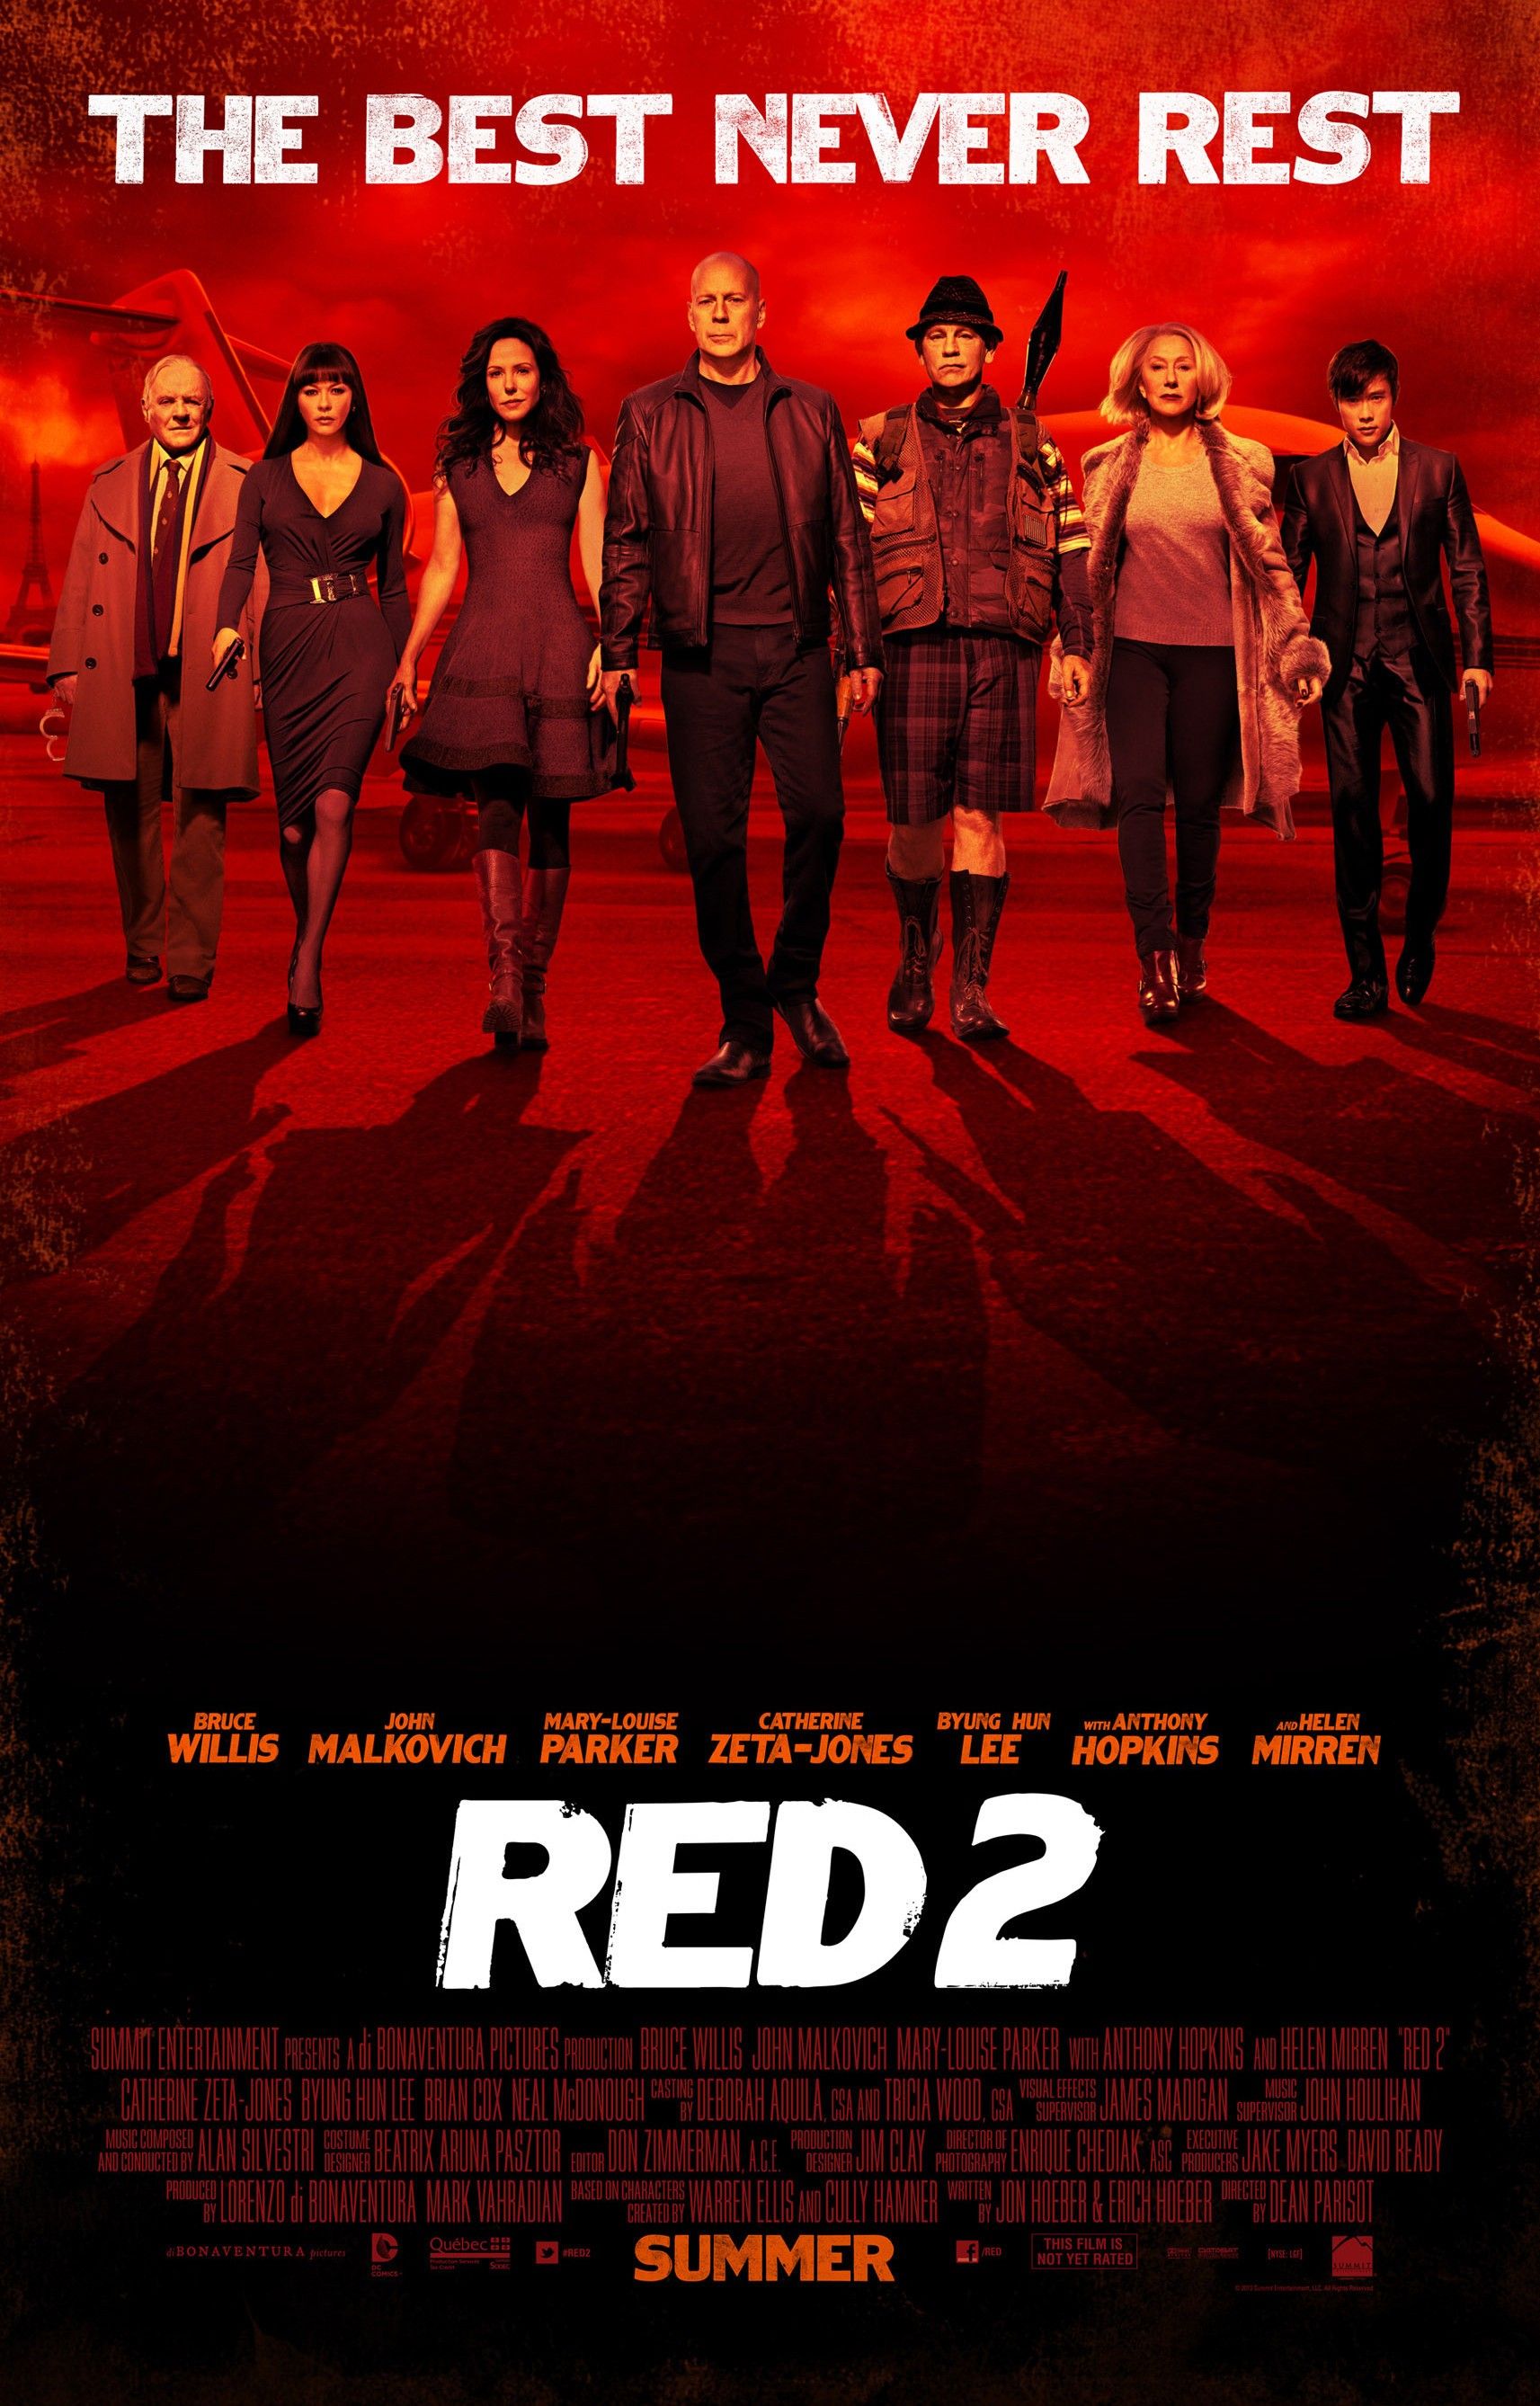 Red 2 Cast poster